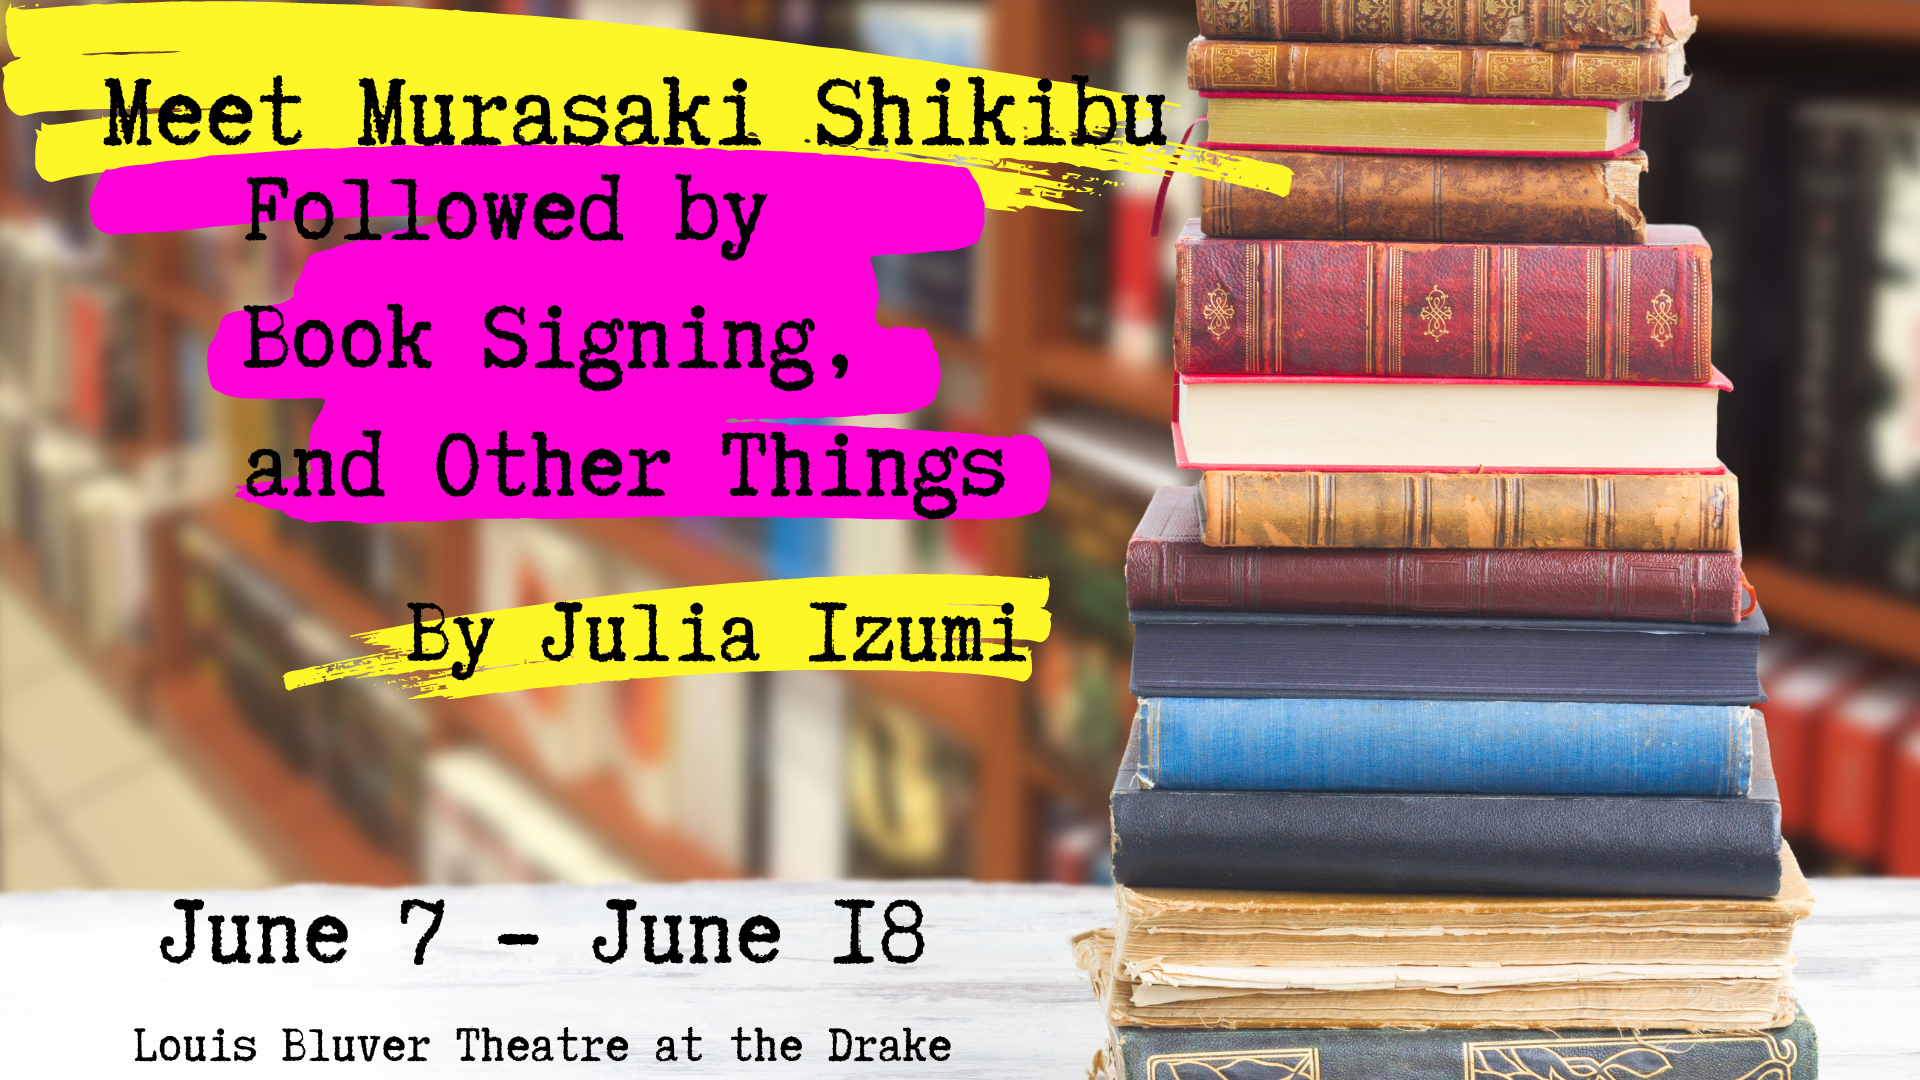 A stack of old books in a modern book shop with the text, which is highlighted in neon yellow and pink, "Meet Murasaki Shikibu Followed by Book Signing, and Other Things by Julia Isume, June 14 - June 25 Louis Bluver Theatre at the Drake